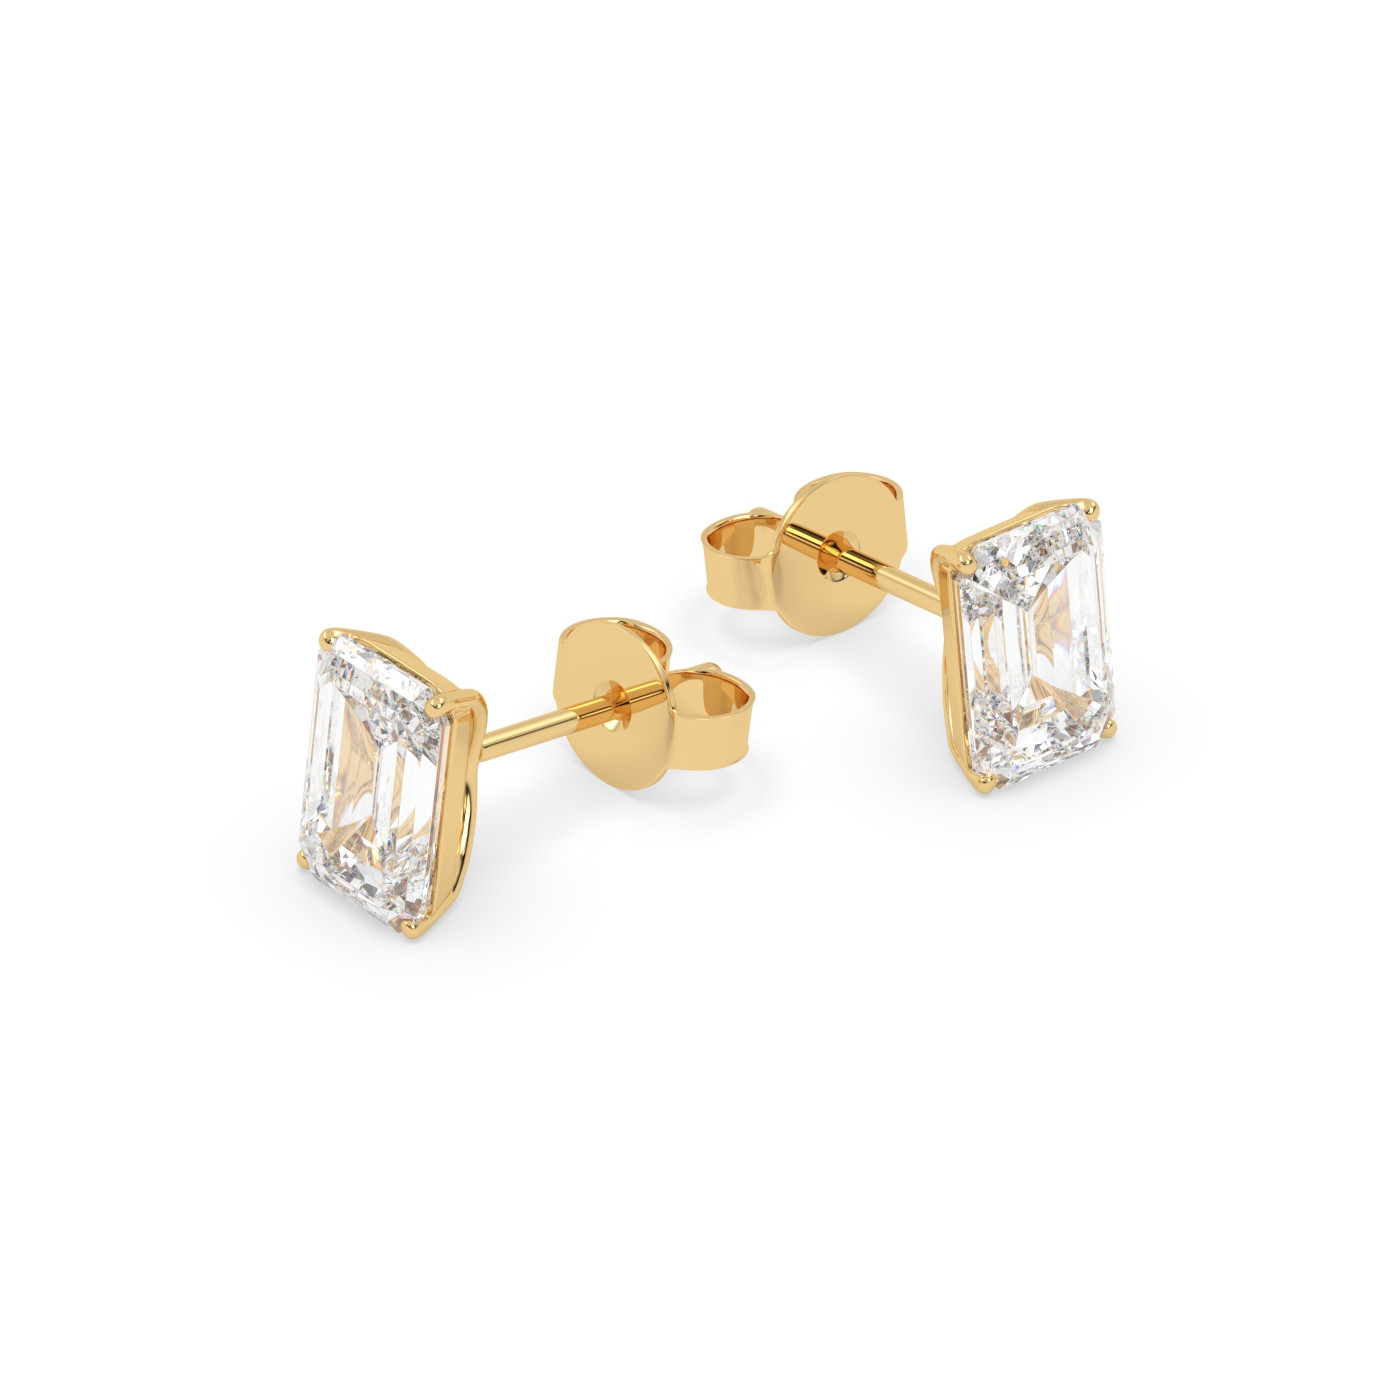 18k yellow gold 1.4 carat emerald stud earrings with butterfly back